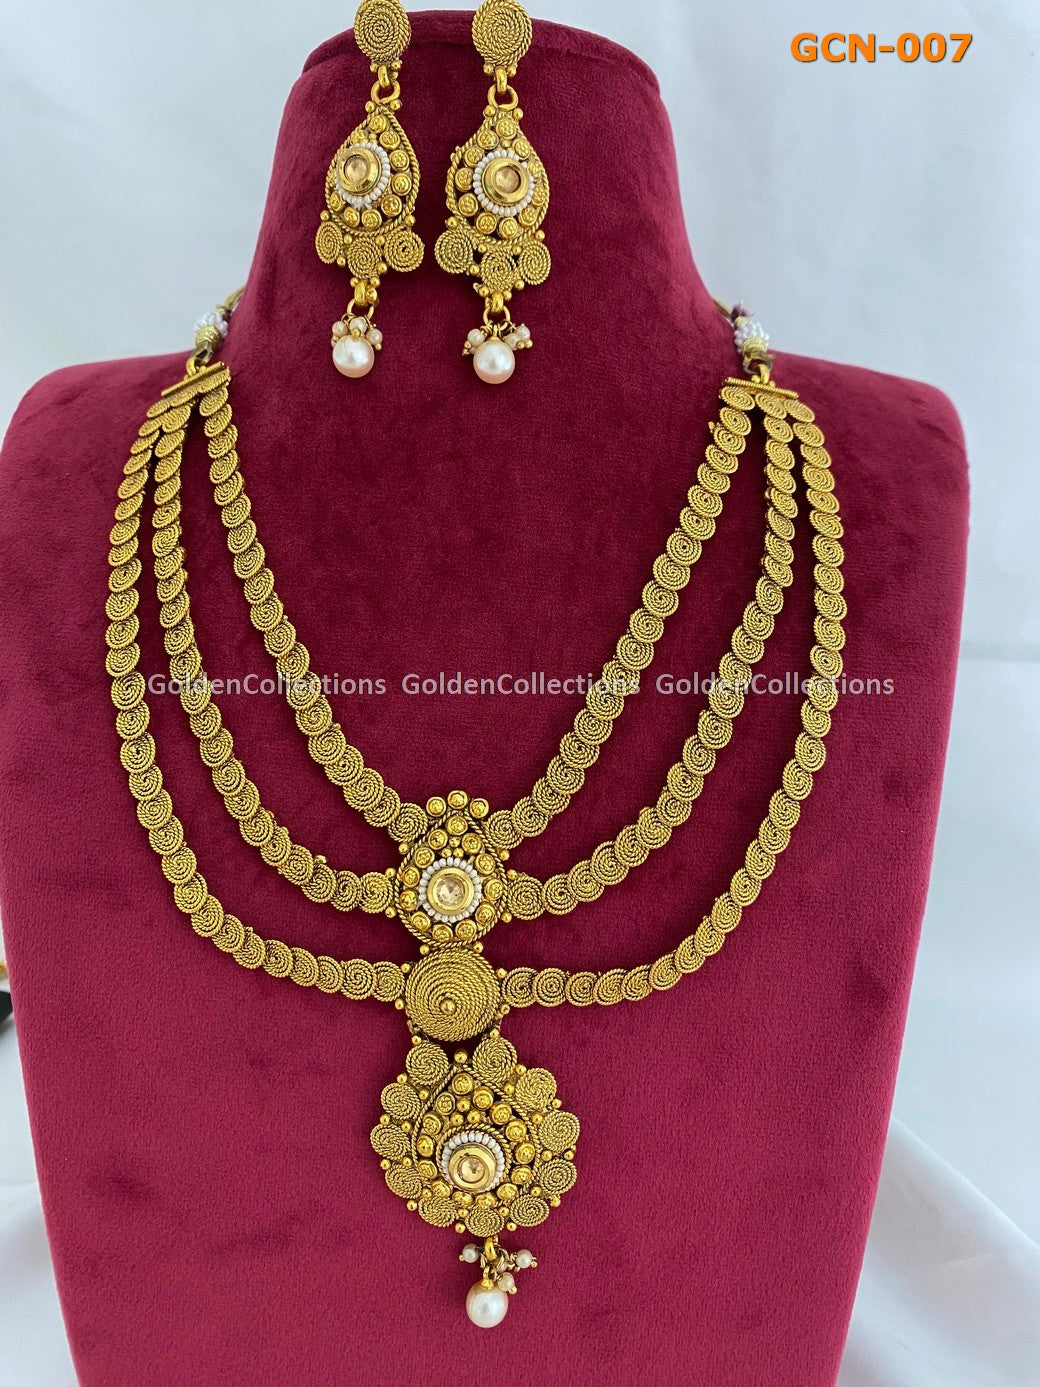 Three Layer Necklace : Handmade Necklace For Women Golden Collections 